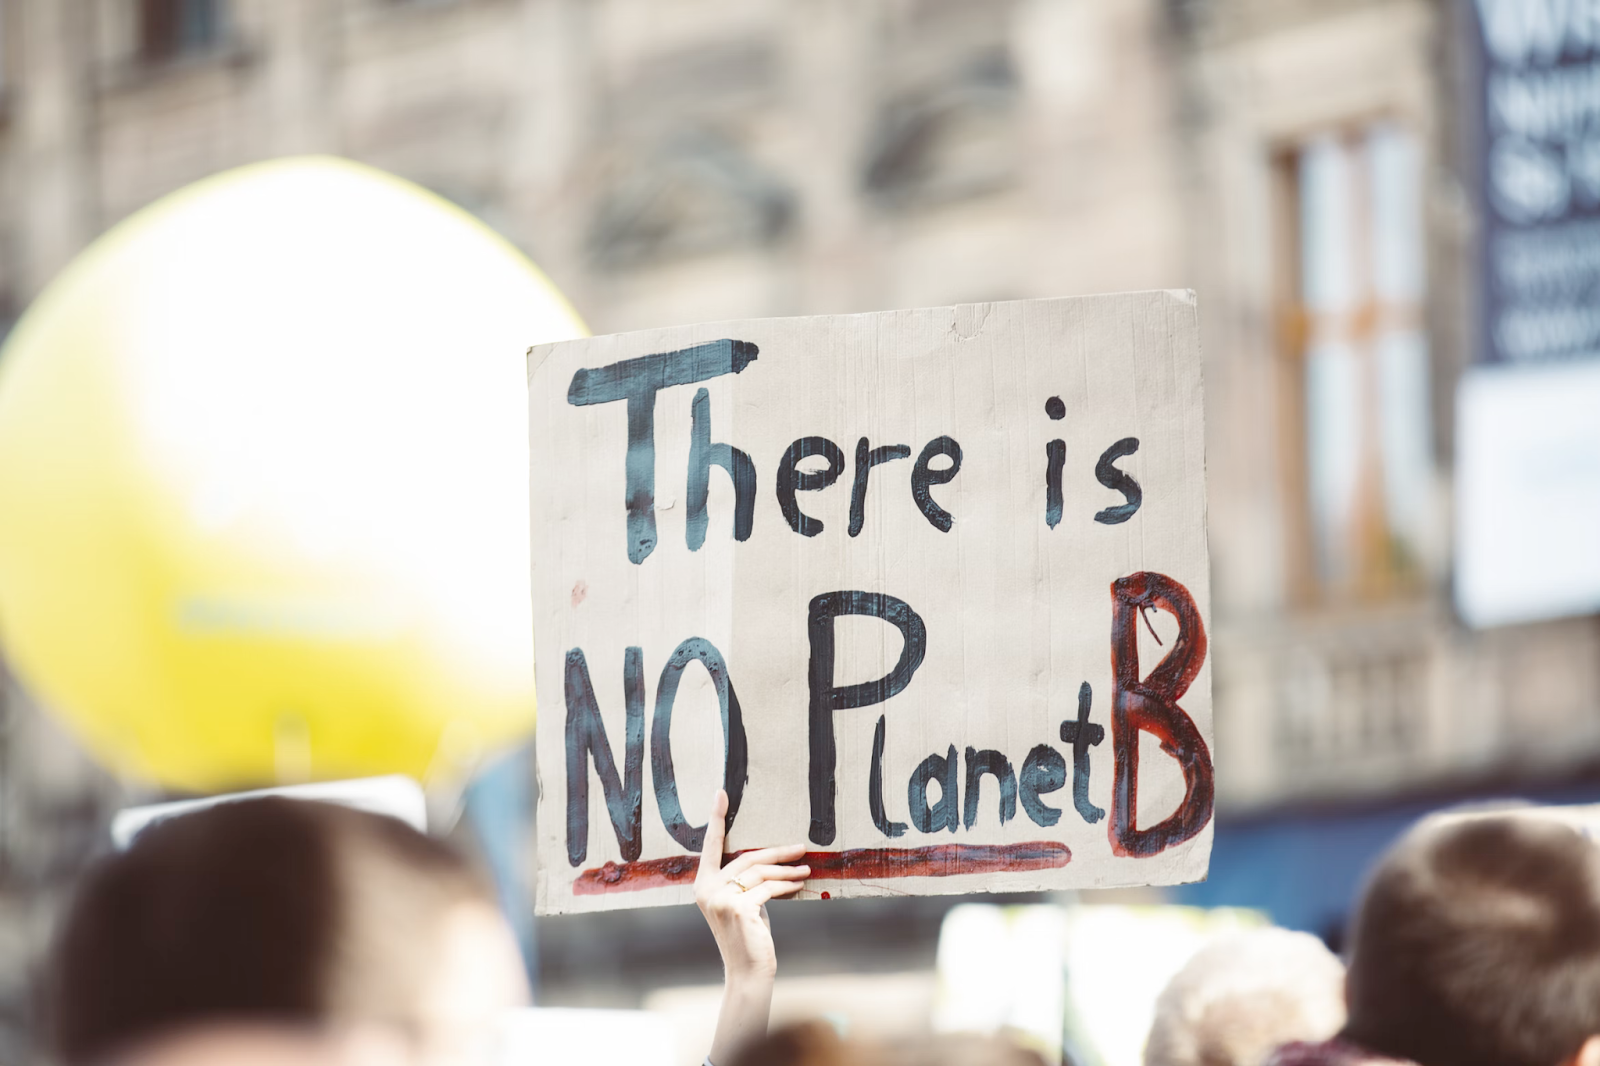 Person holding up a sign that says "there is no planet B"